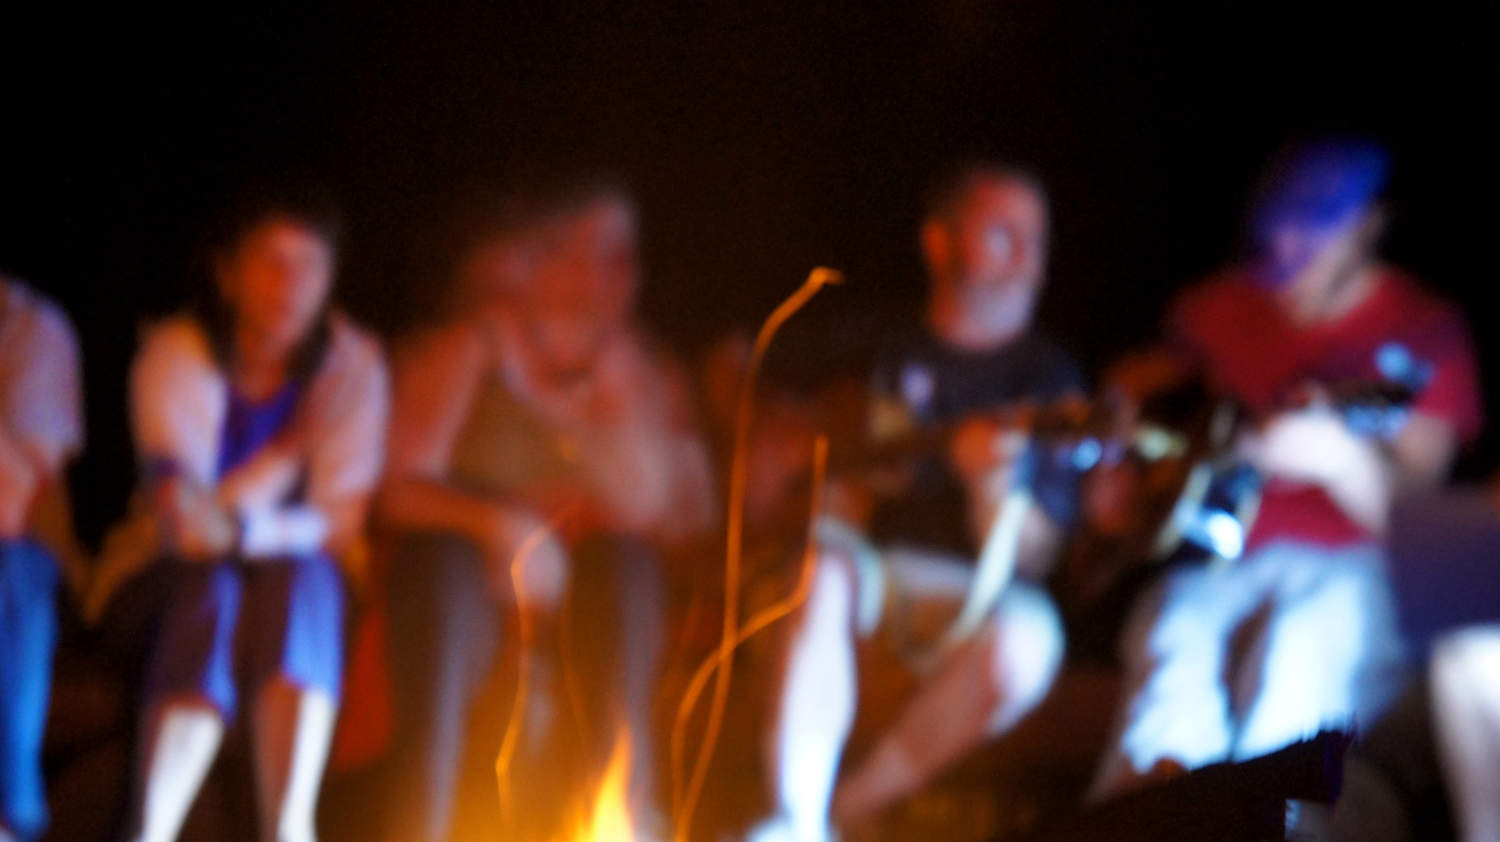 A group sitting around the fire sharing ideas and music